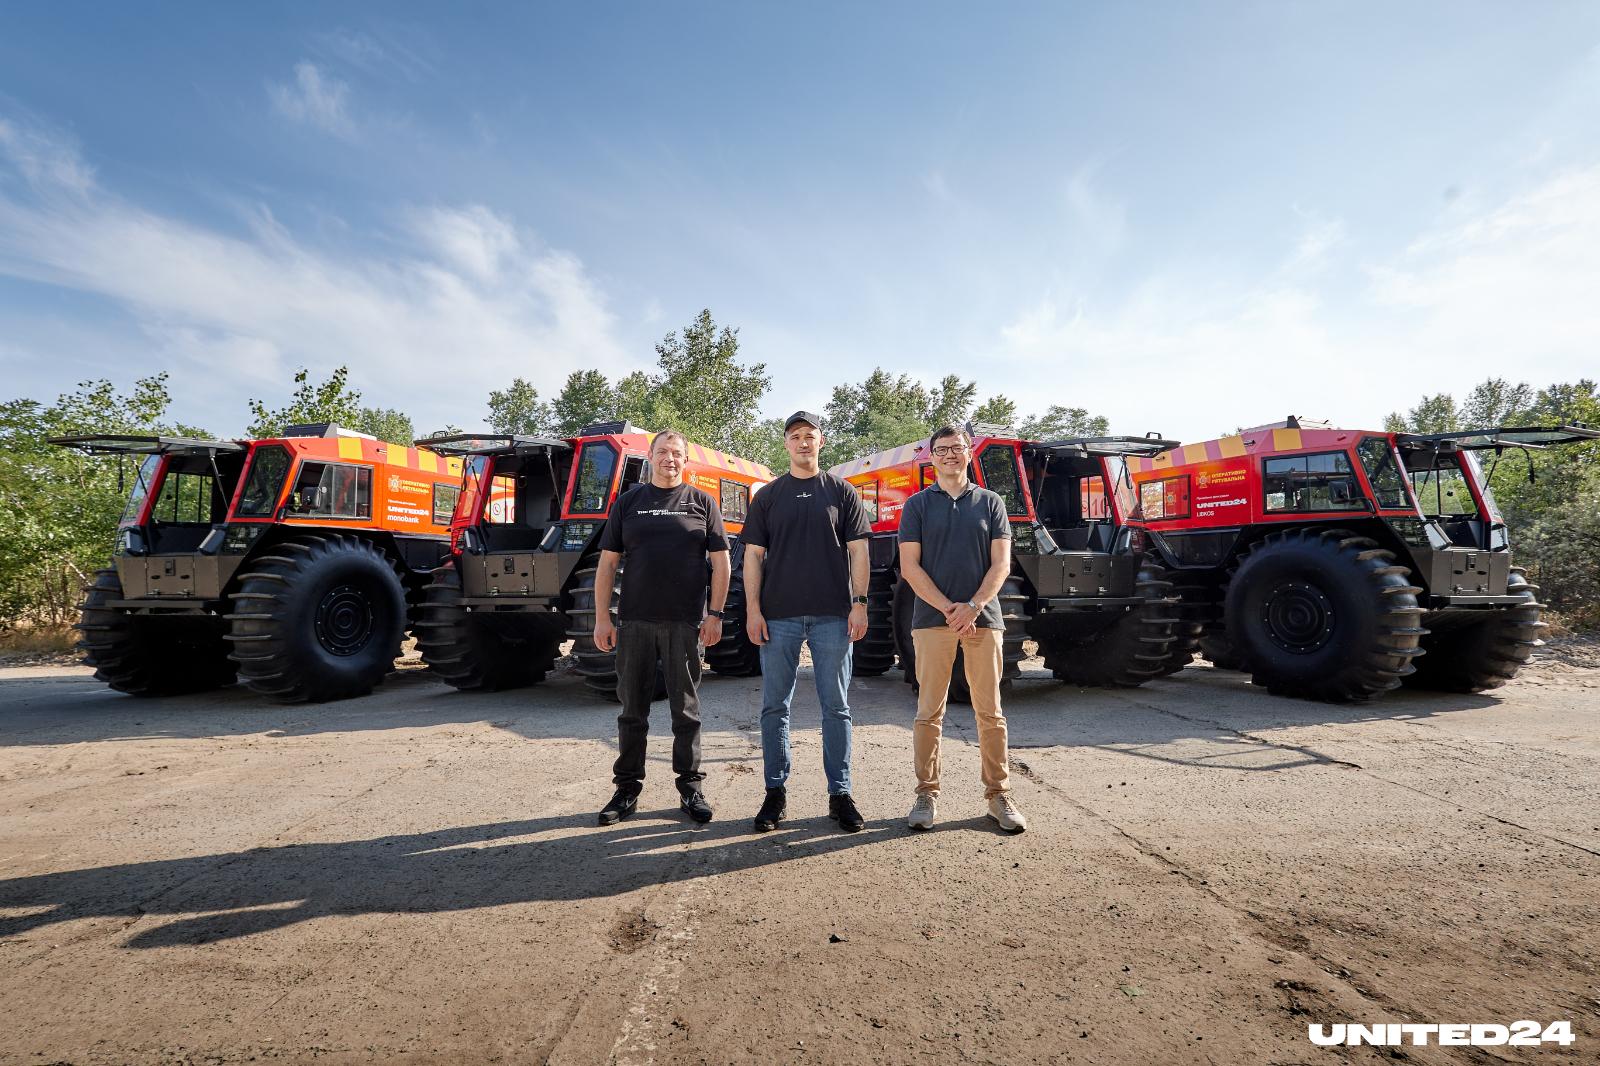 All-terrain vehicles purchased as part of the UNITED24 Lifeboat for Ukraine fundraiser have been handed over to Kherson Oblast